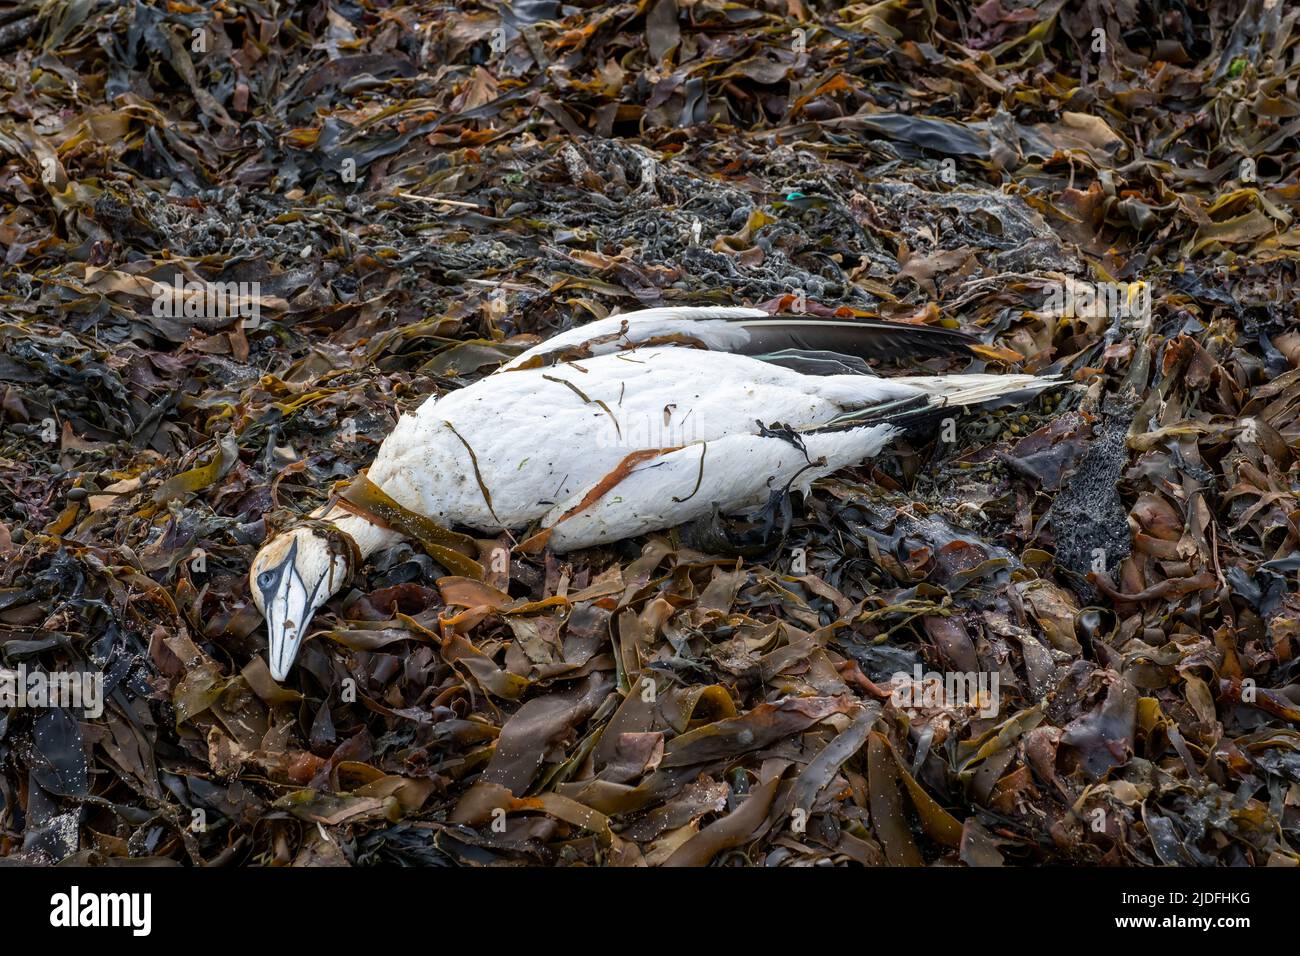 Dead Gannet (suspected bird flu) on the foreshore at the Brough of Birsay, Orkney Islands, Scotland Stock Photo